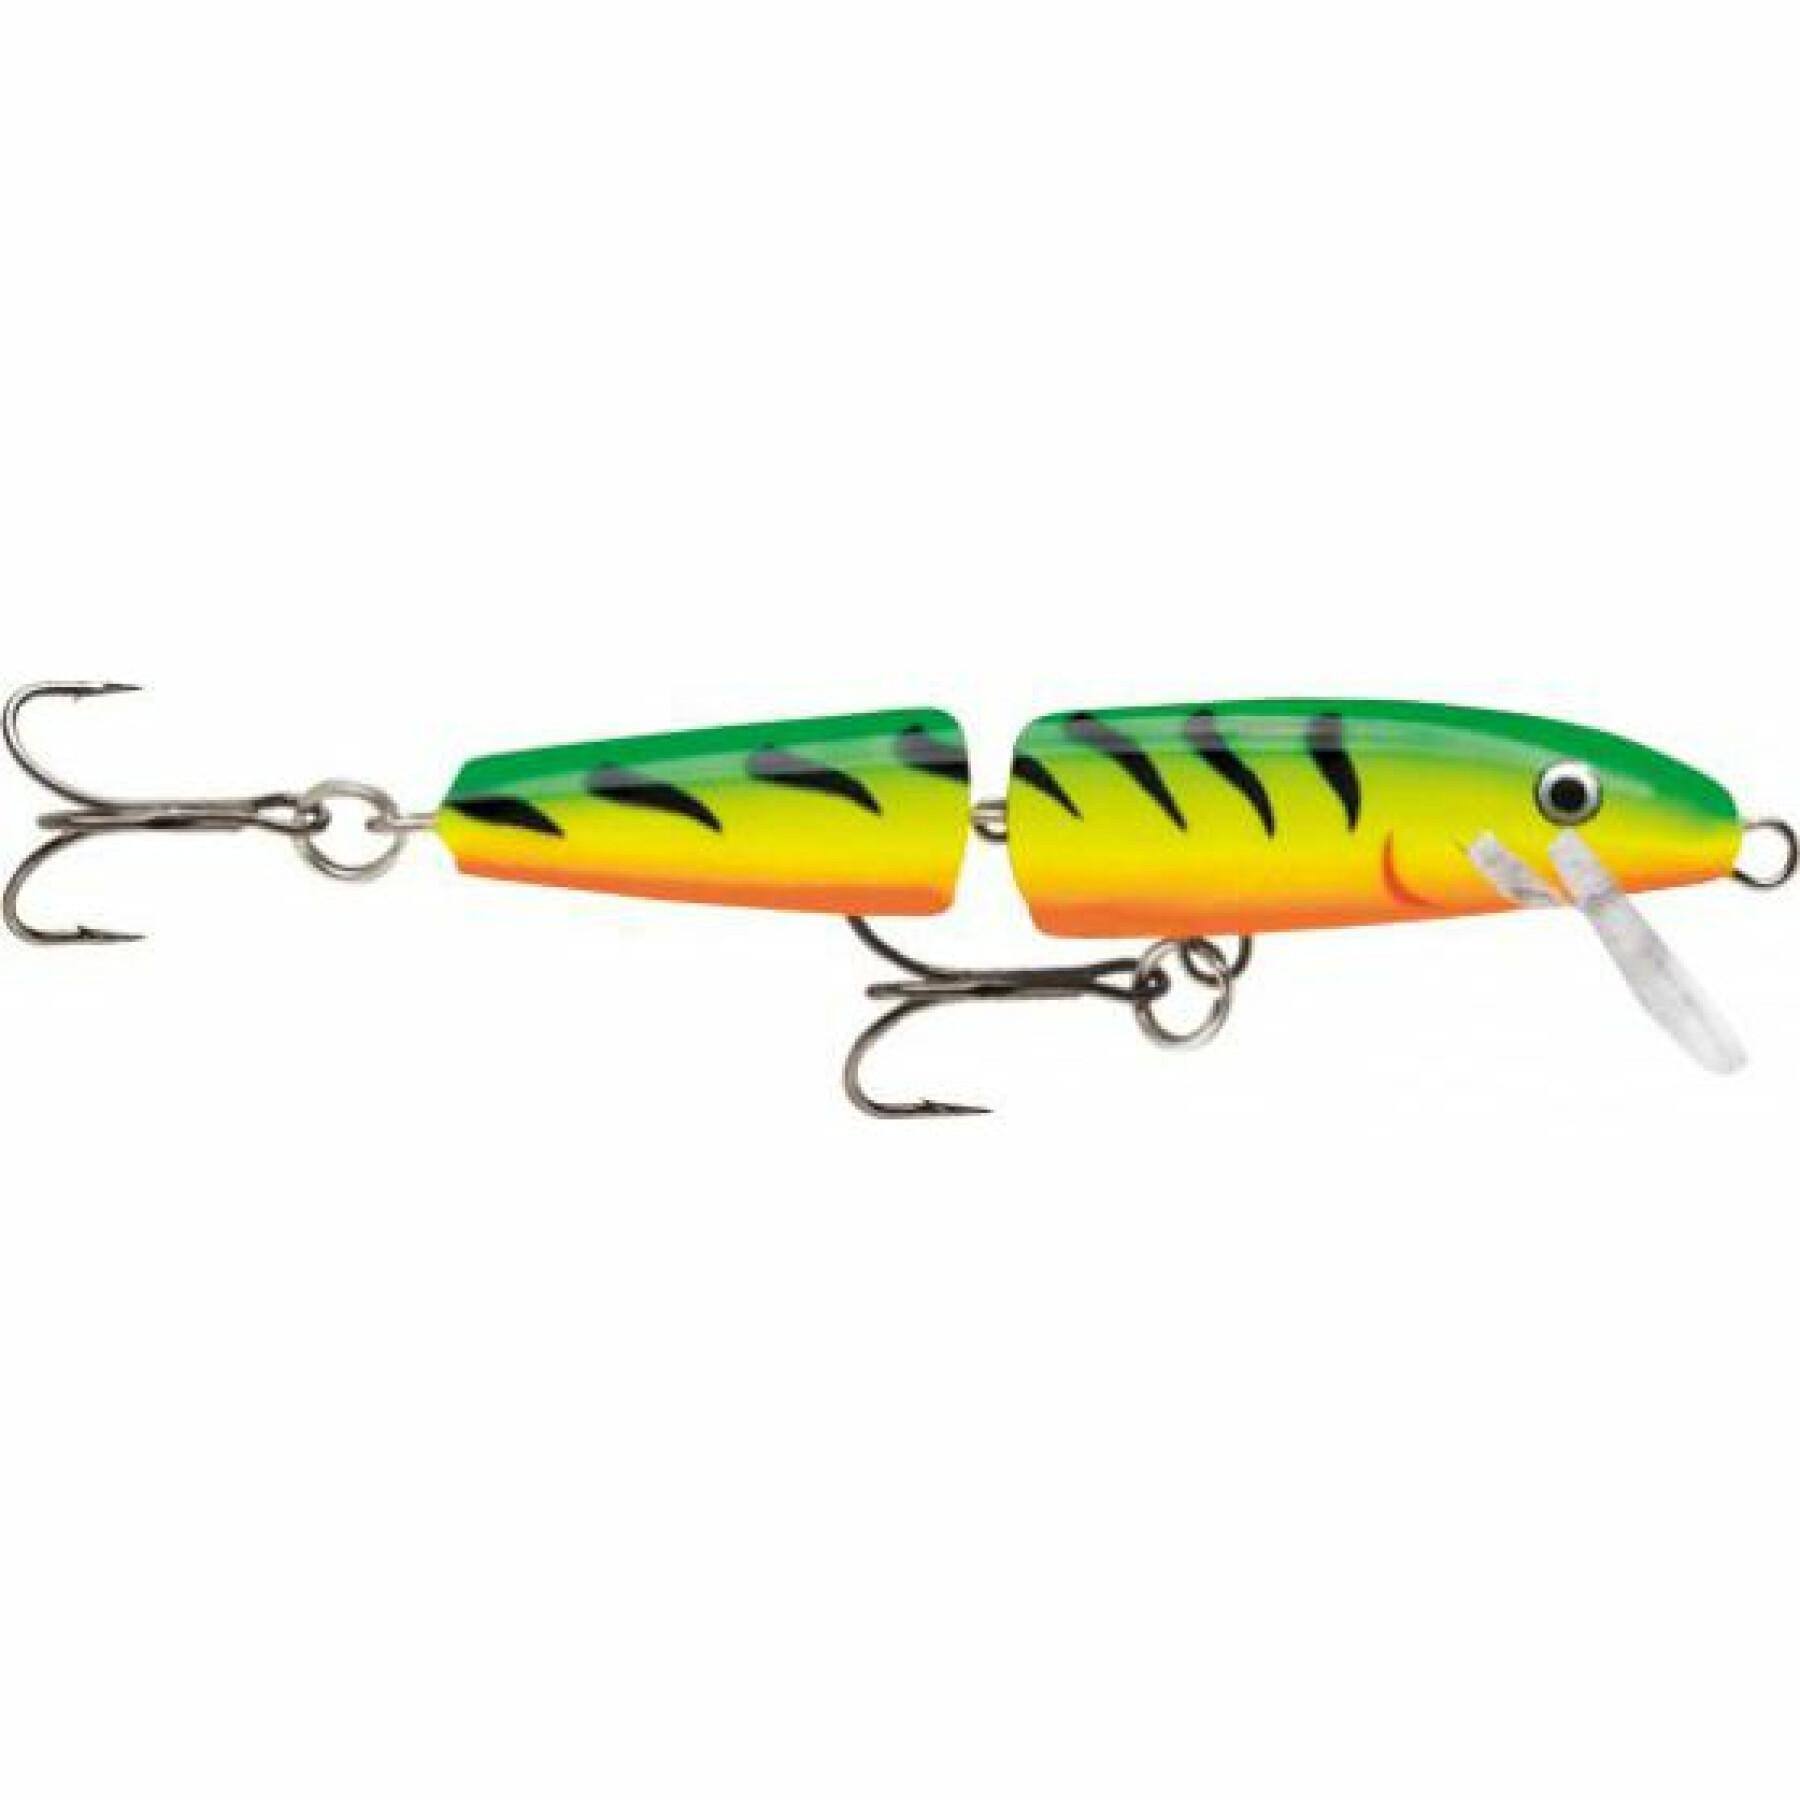 Floating lure Rapala jointed® 7 cm